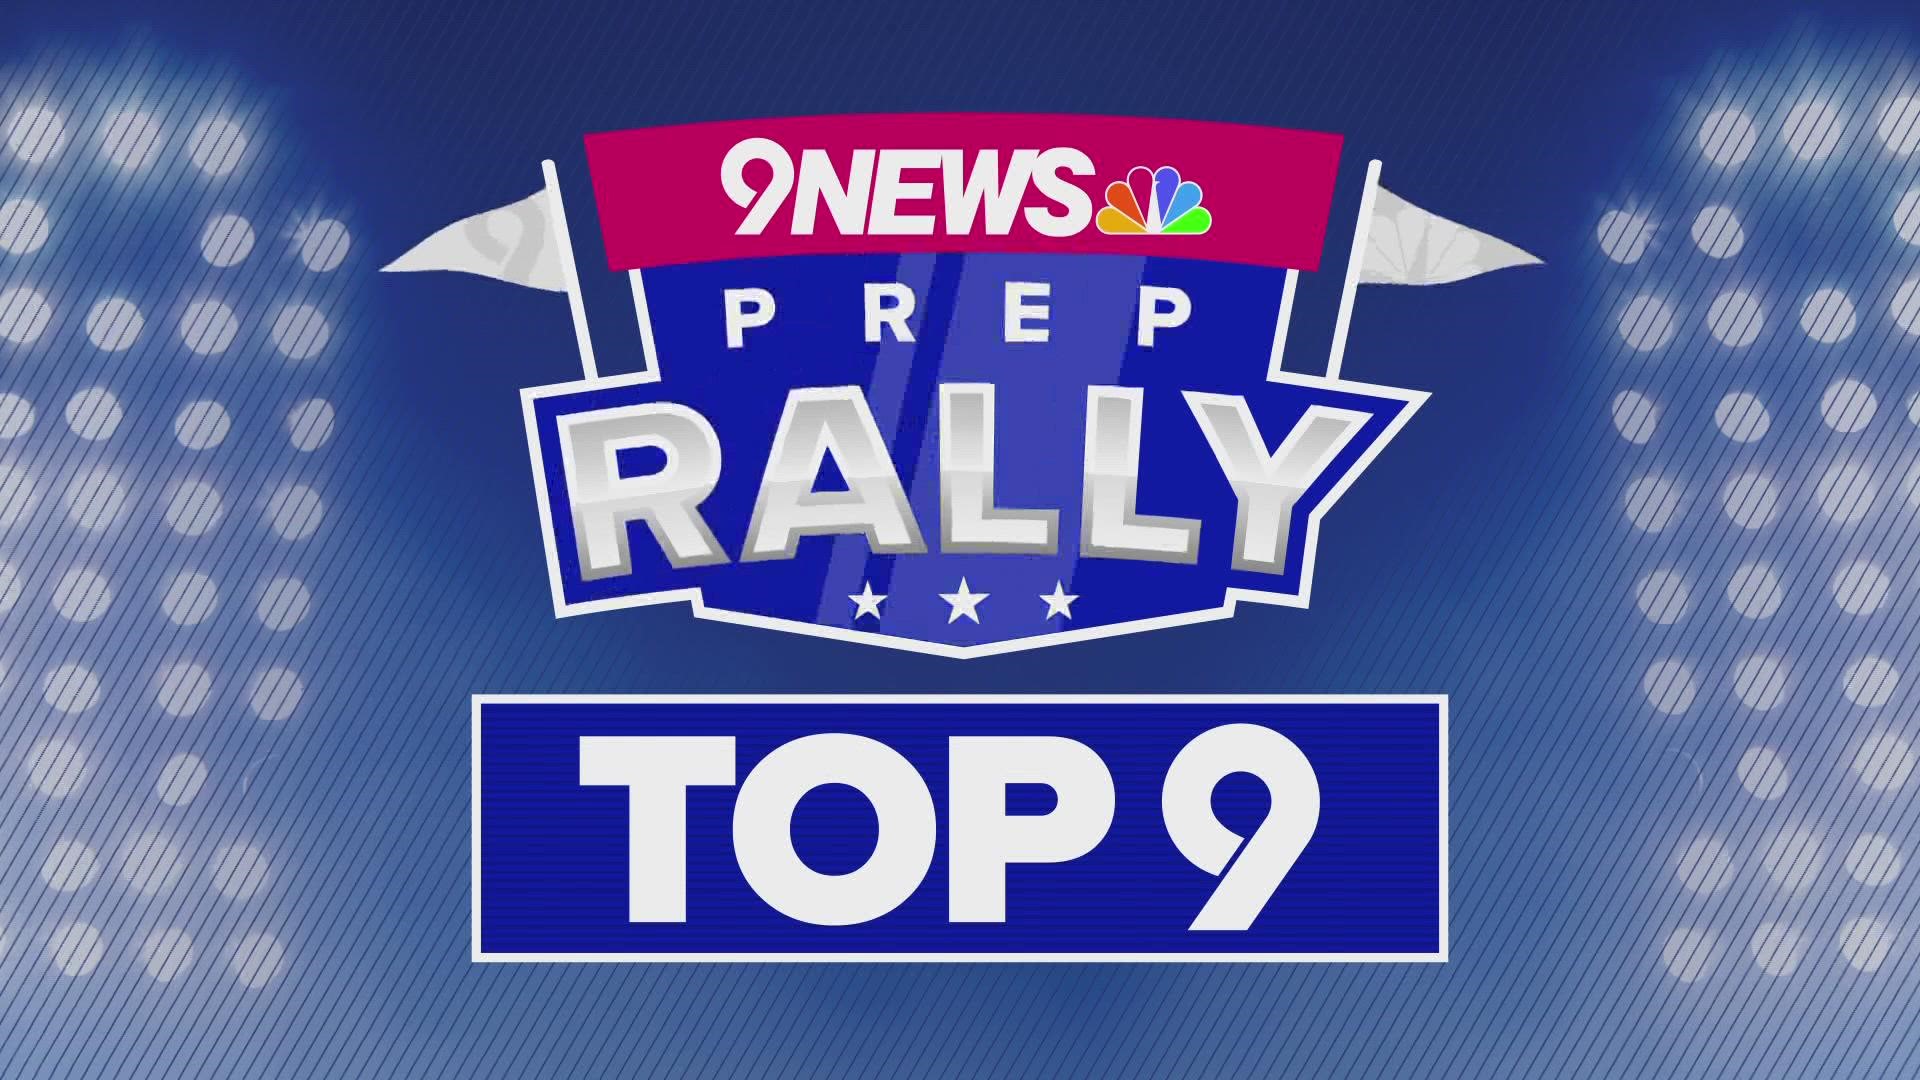 9Preps Reporter Scotty Gange counts down the Top 9 plays of the Colorado high school football season on the Sunday (January 1) morning Prep Rally!